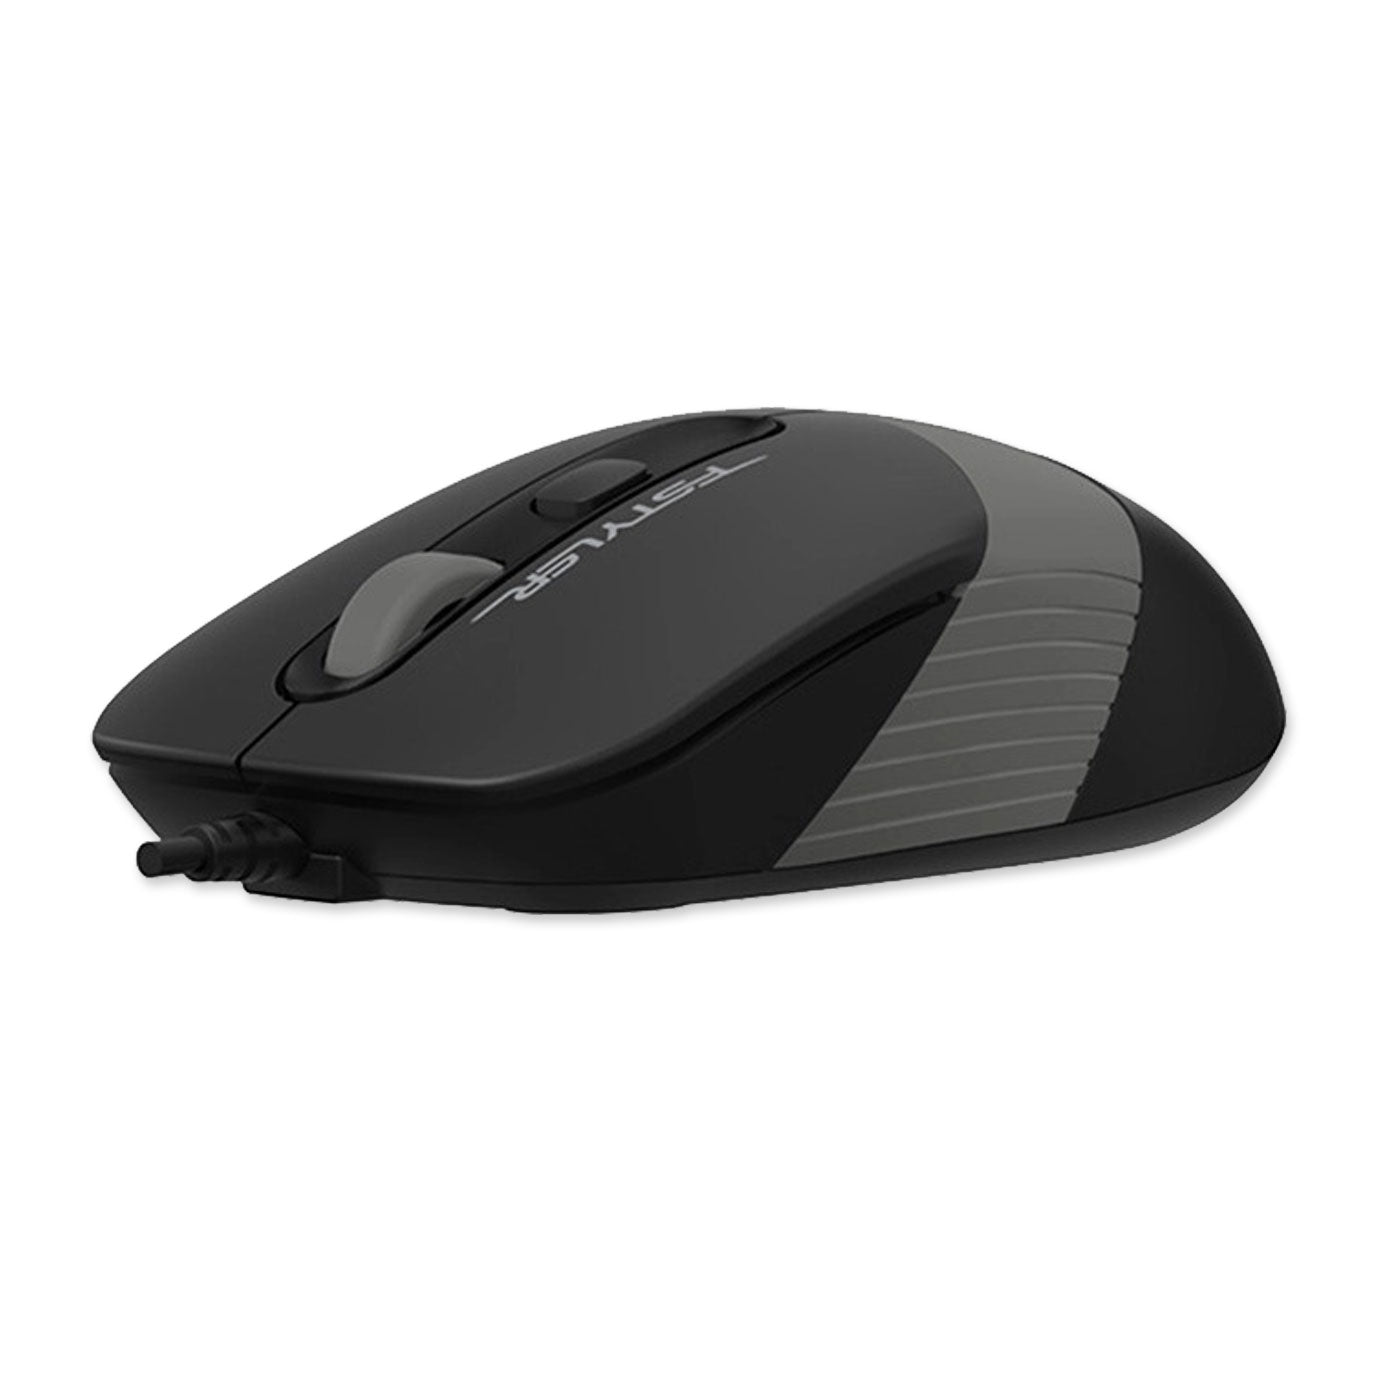 A4Tech Fstyler 1600DPI USB Wired Optical Mouse